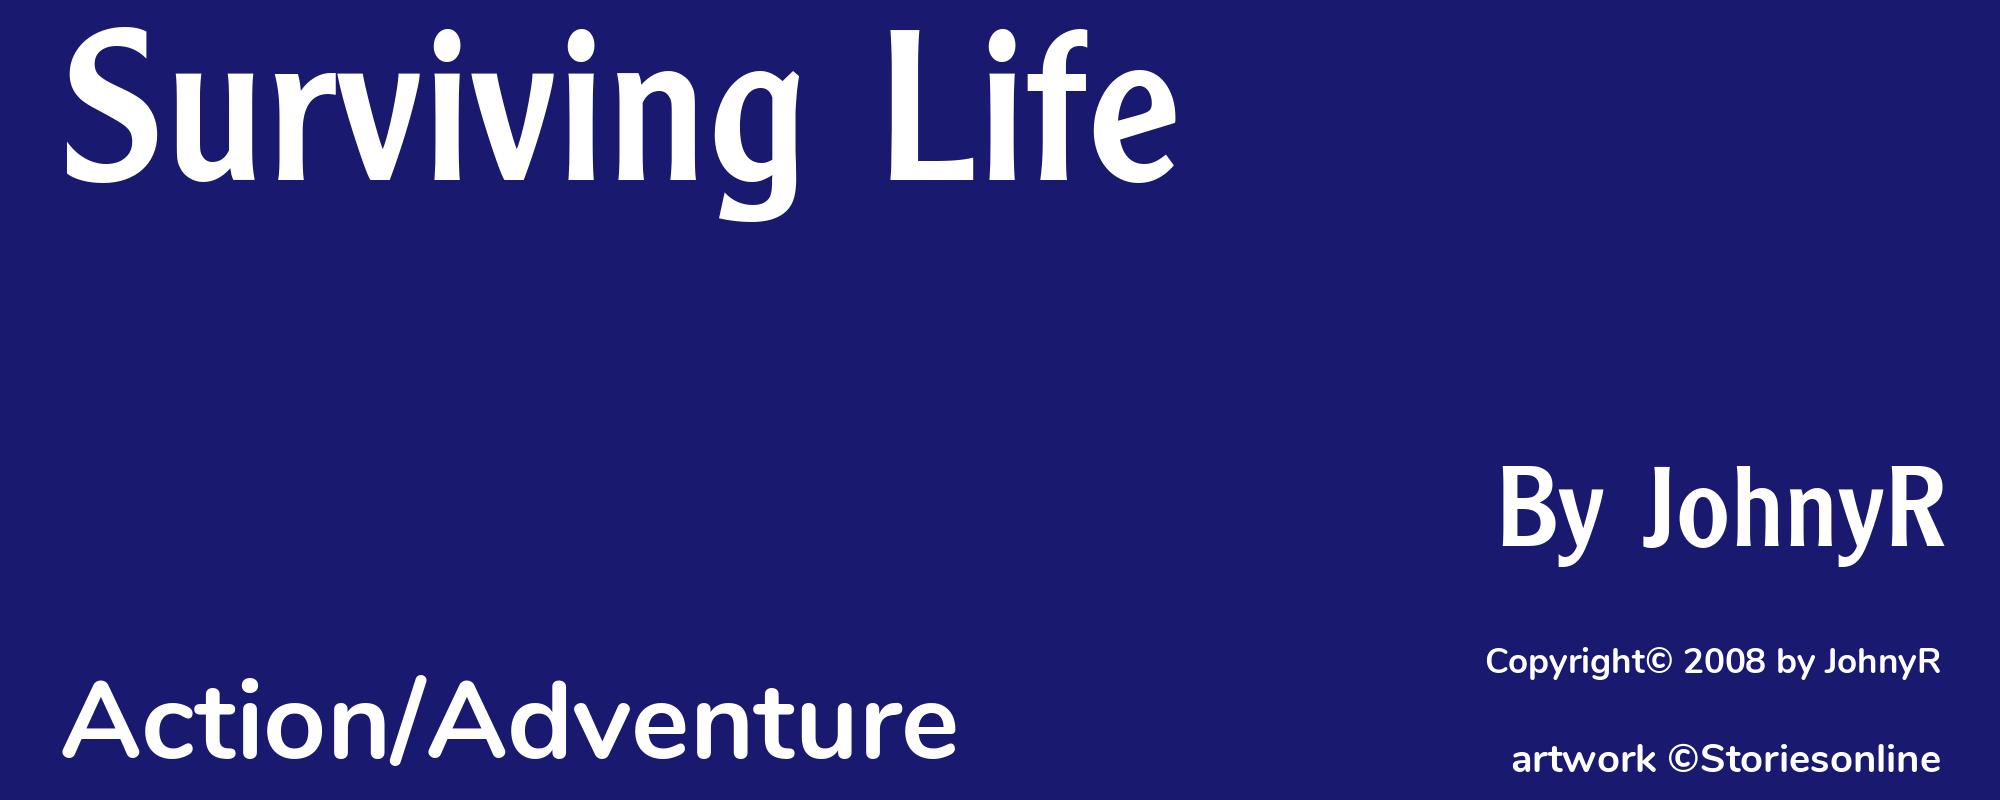 Surviving Life - Cover